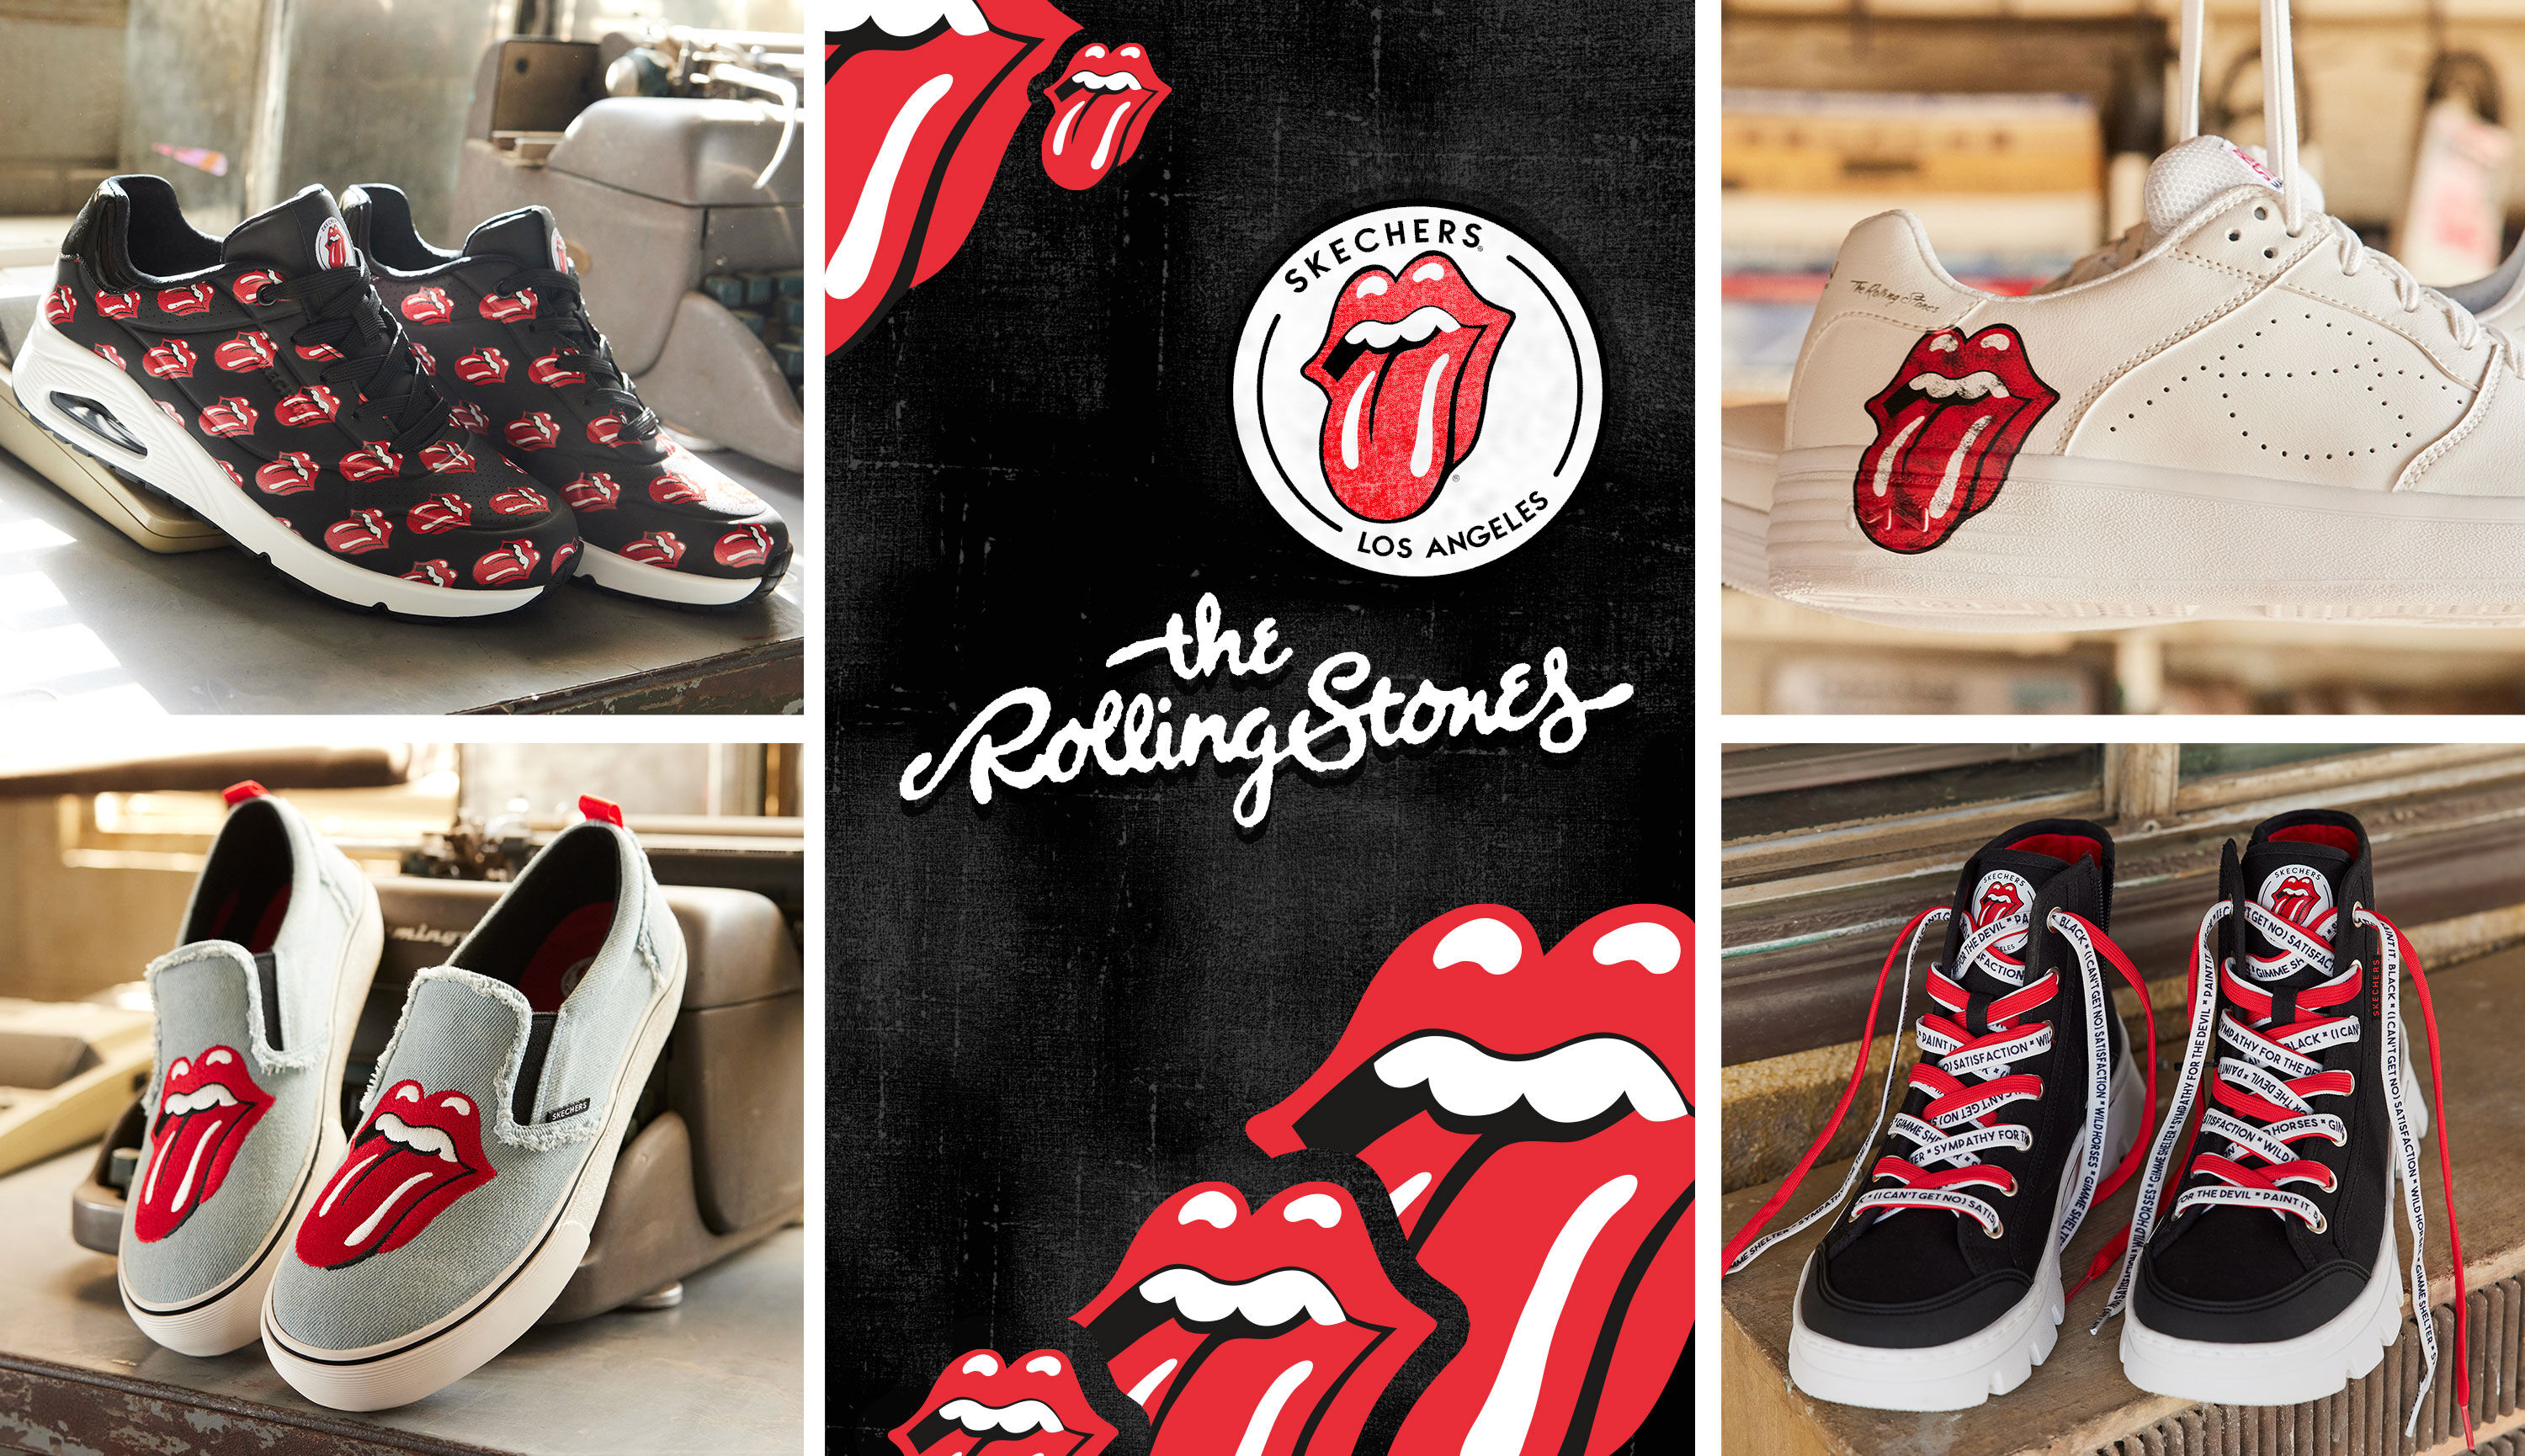 Skechers x The Rolling Stones Shoe Collab: Shop the Collection Now